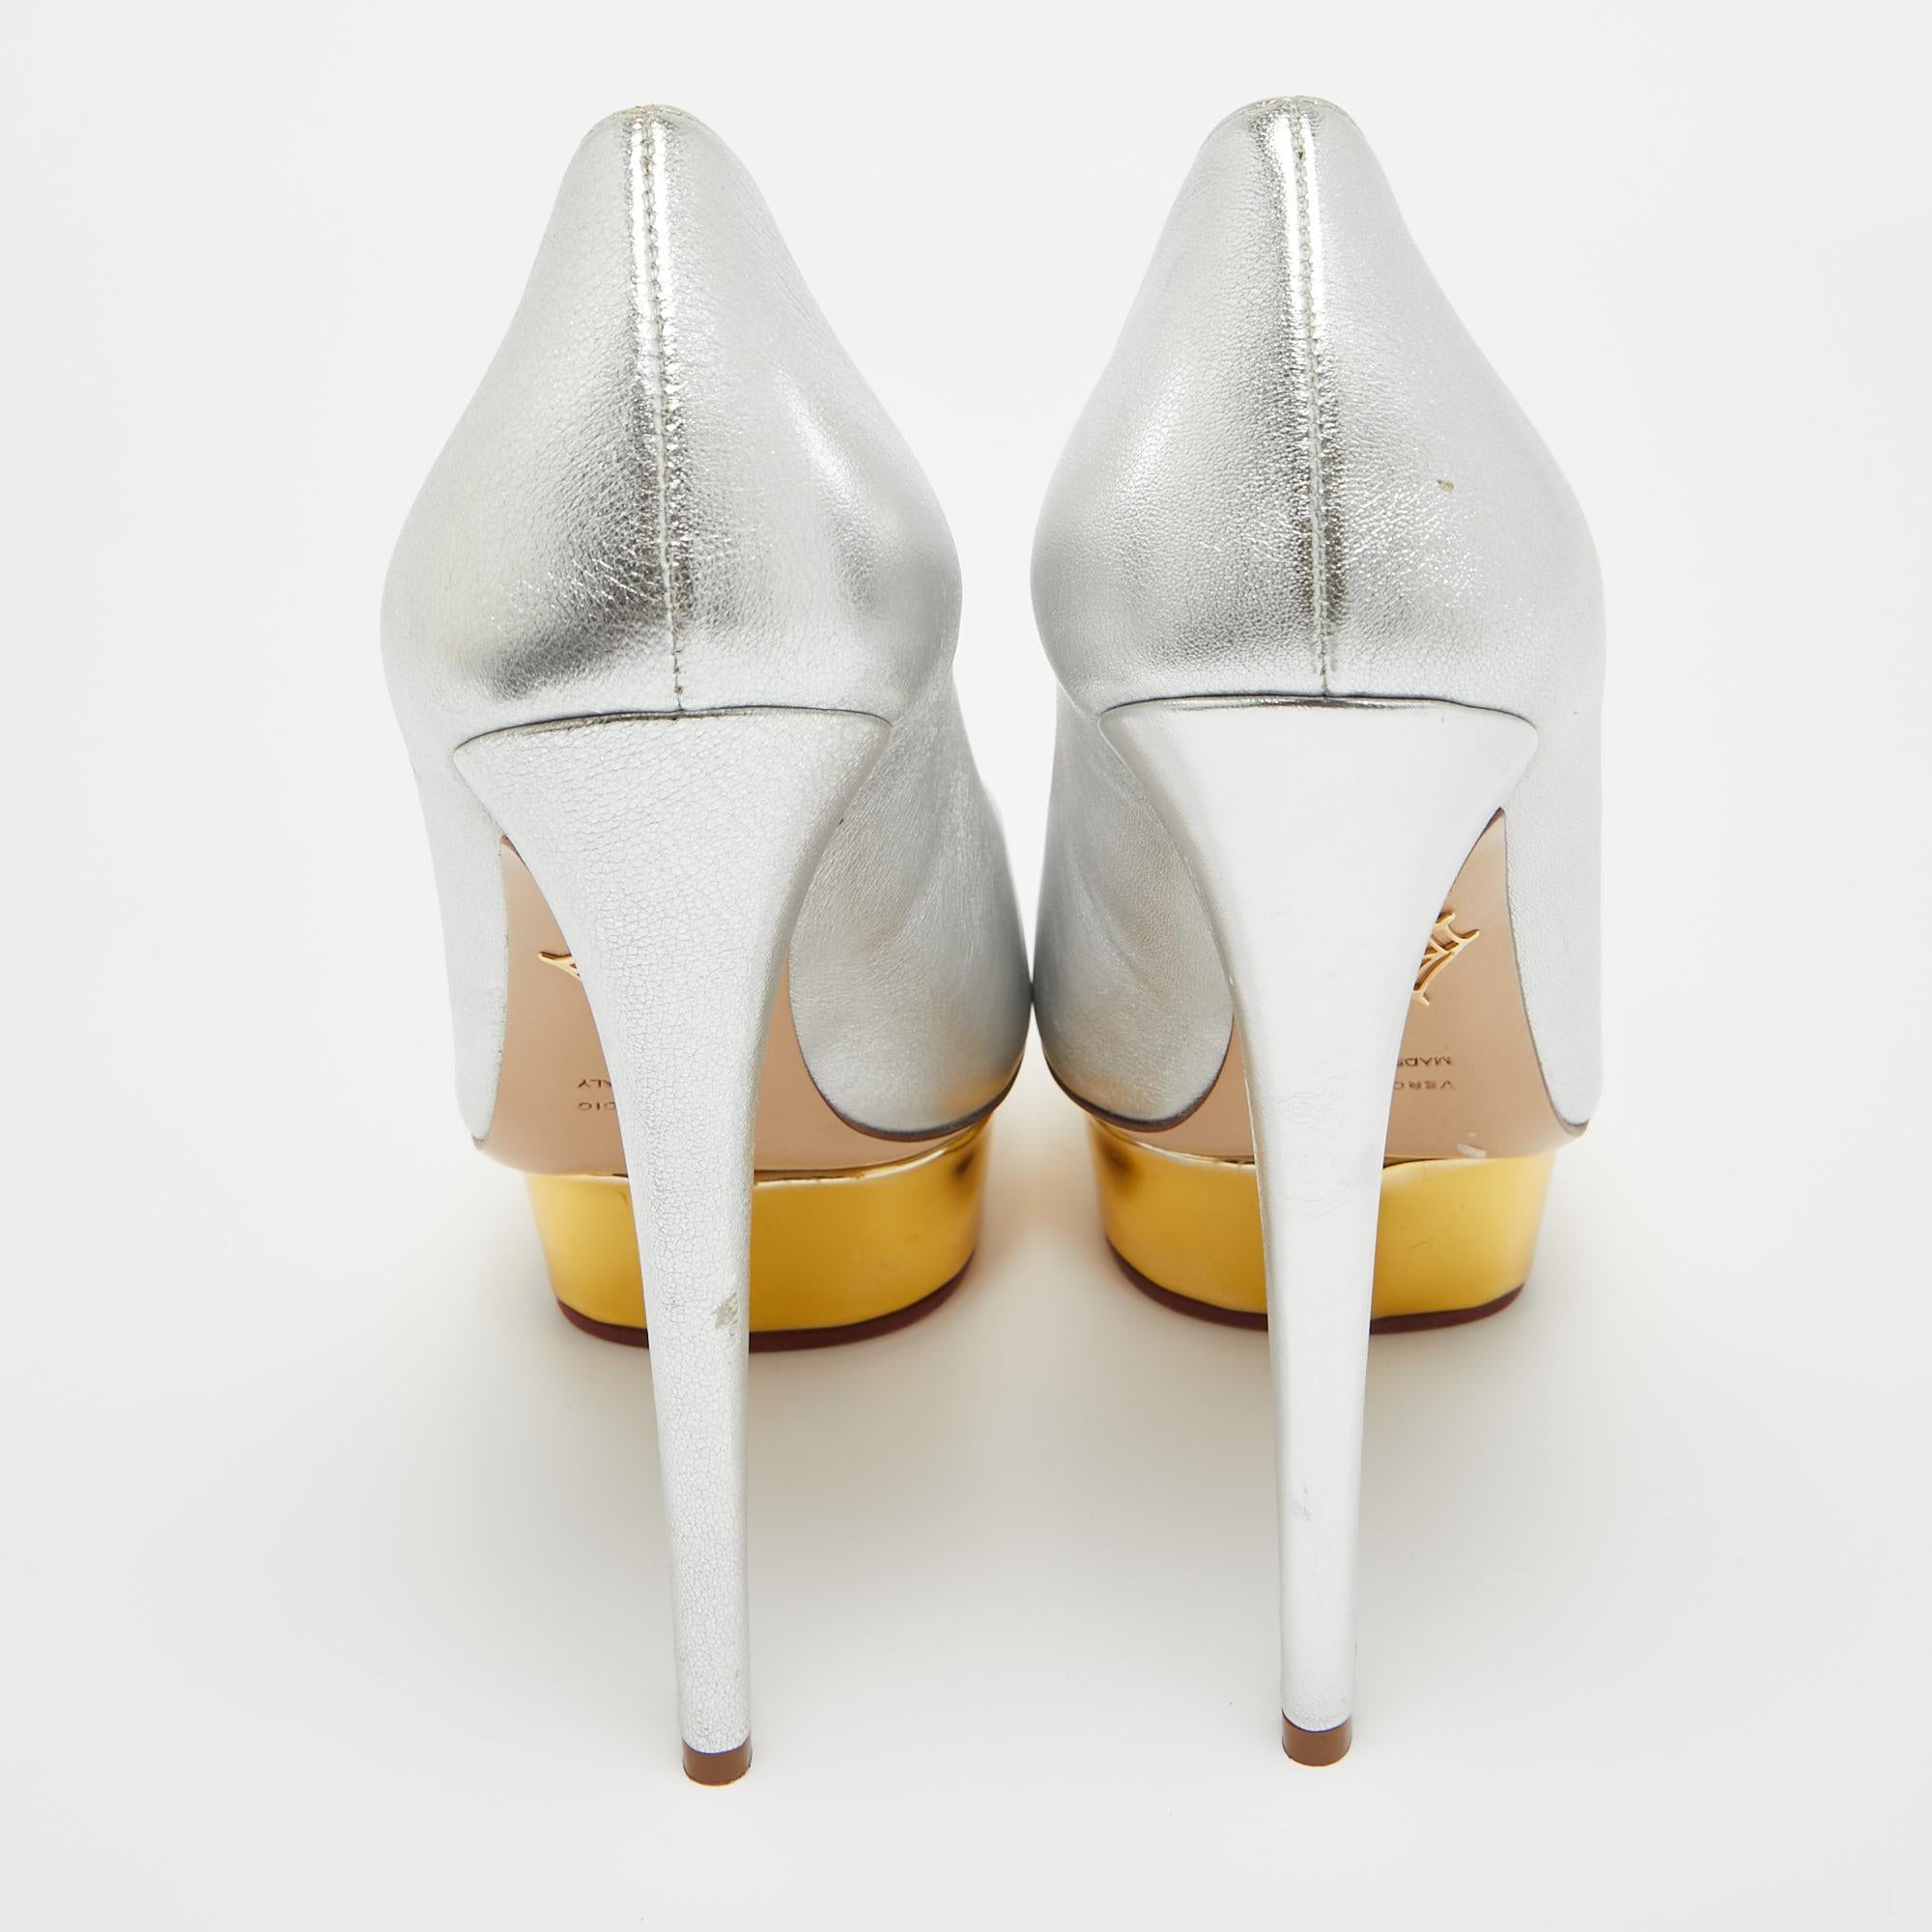 Charlotte Olympia Silver Leather Dolly Platform Pumps Size 40 3